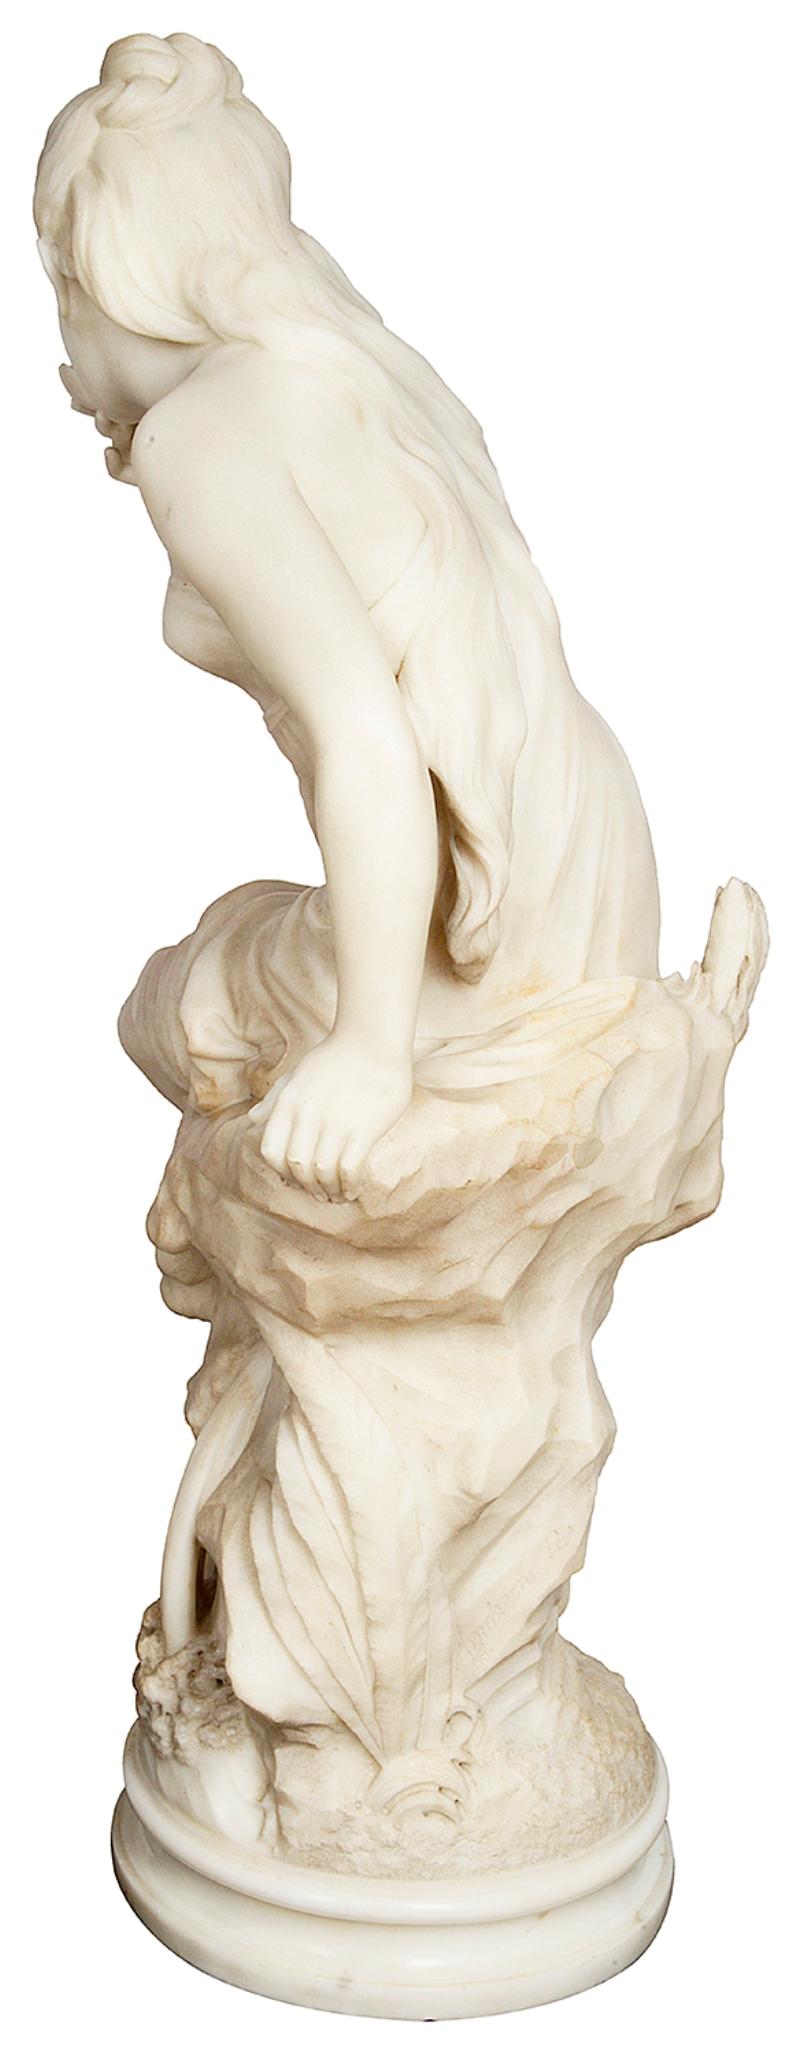 Italian 19th Century Marble Statue of a Young Girl, by Orazio Andreoni